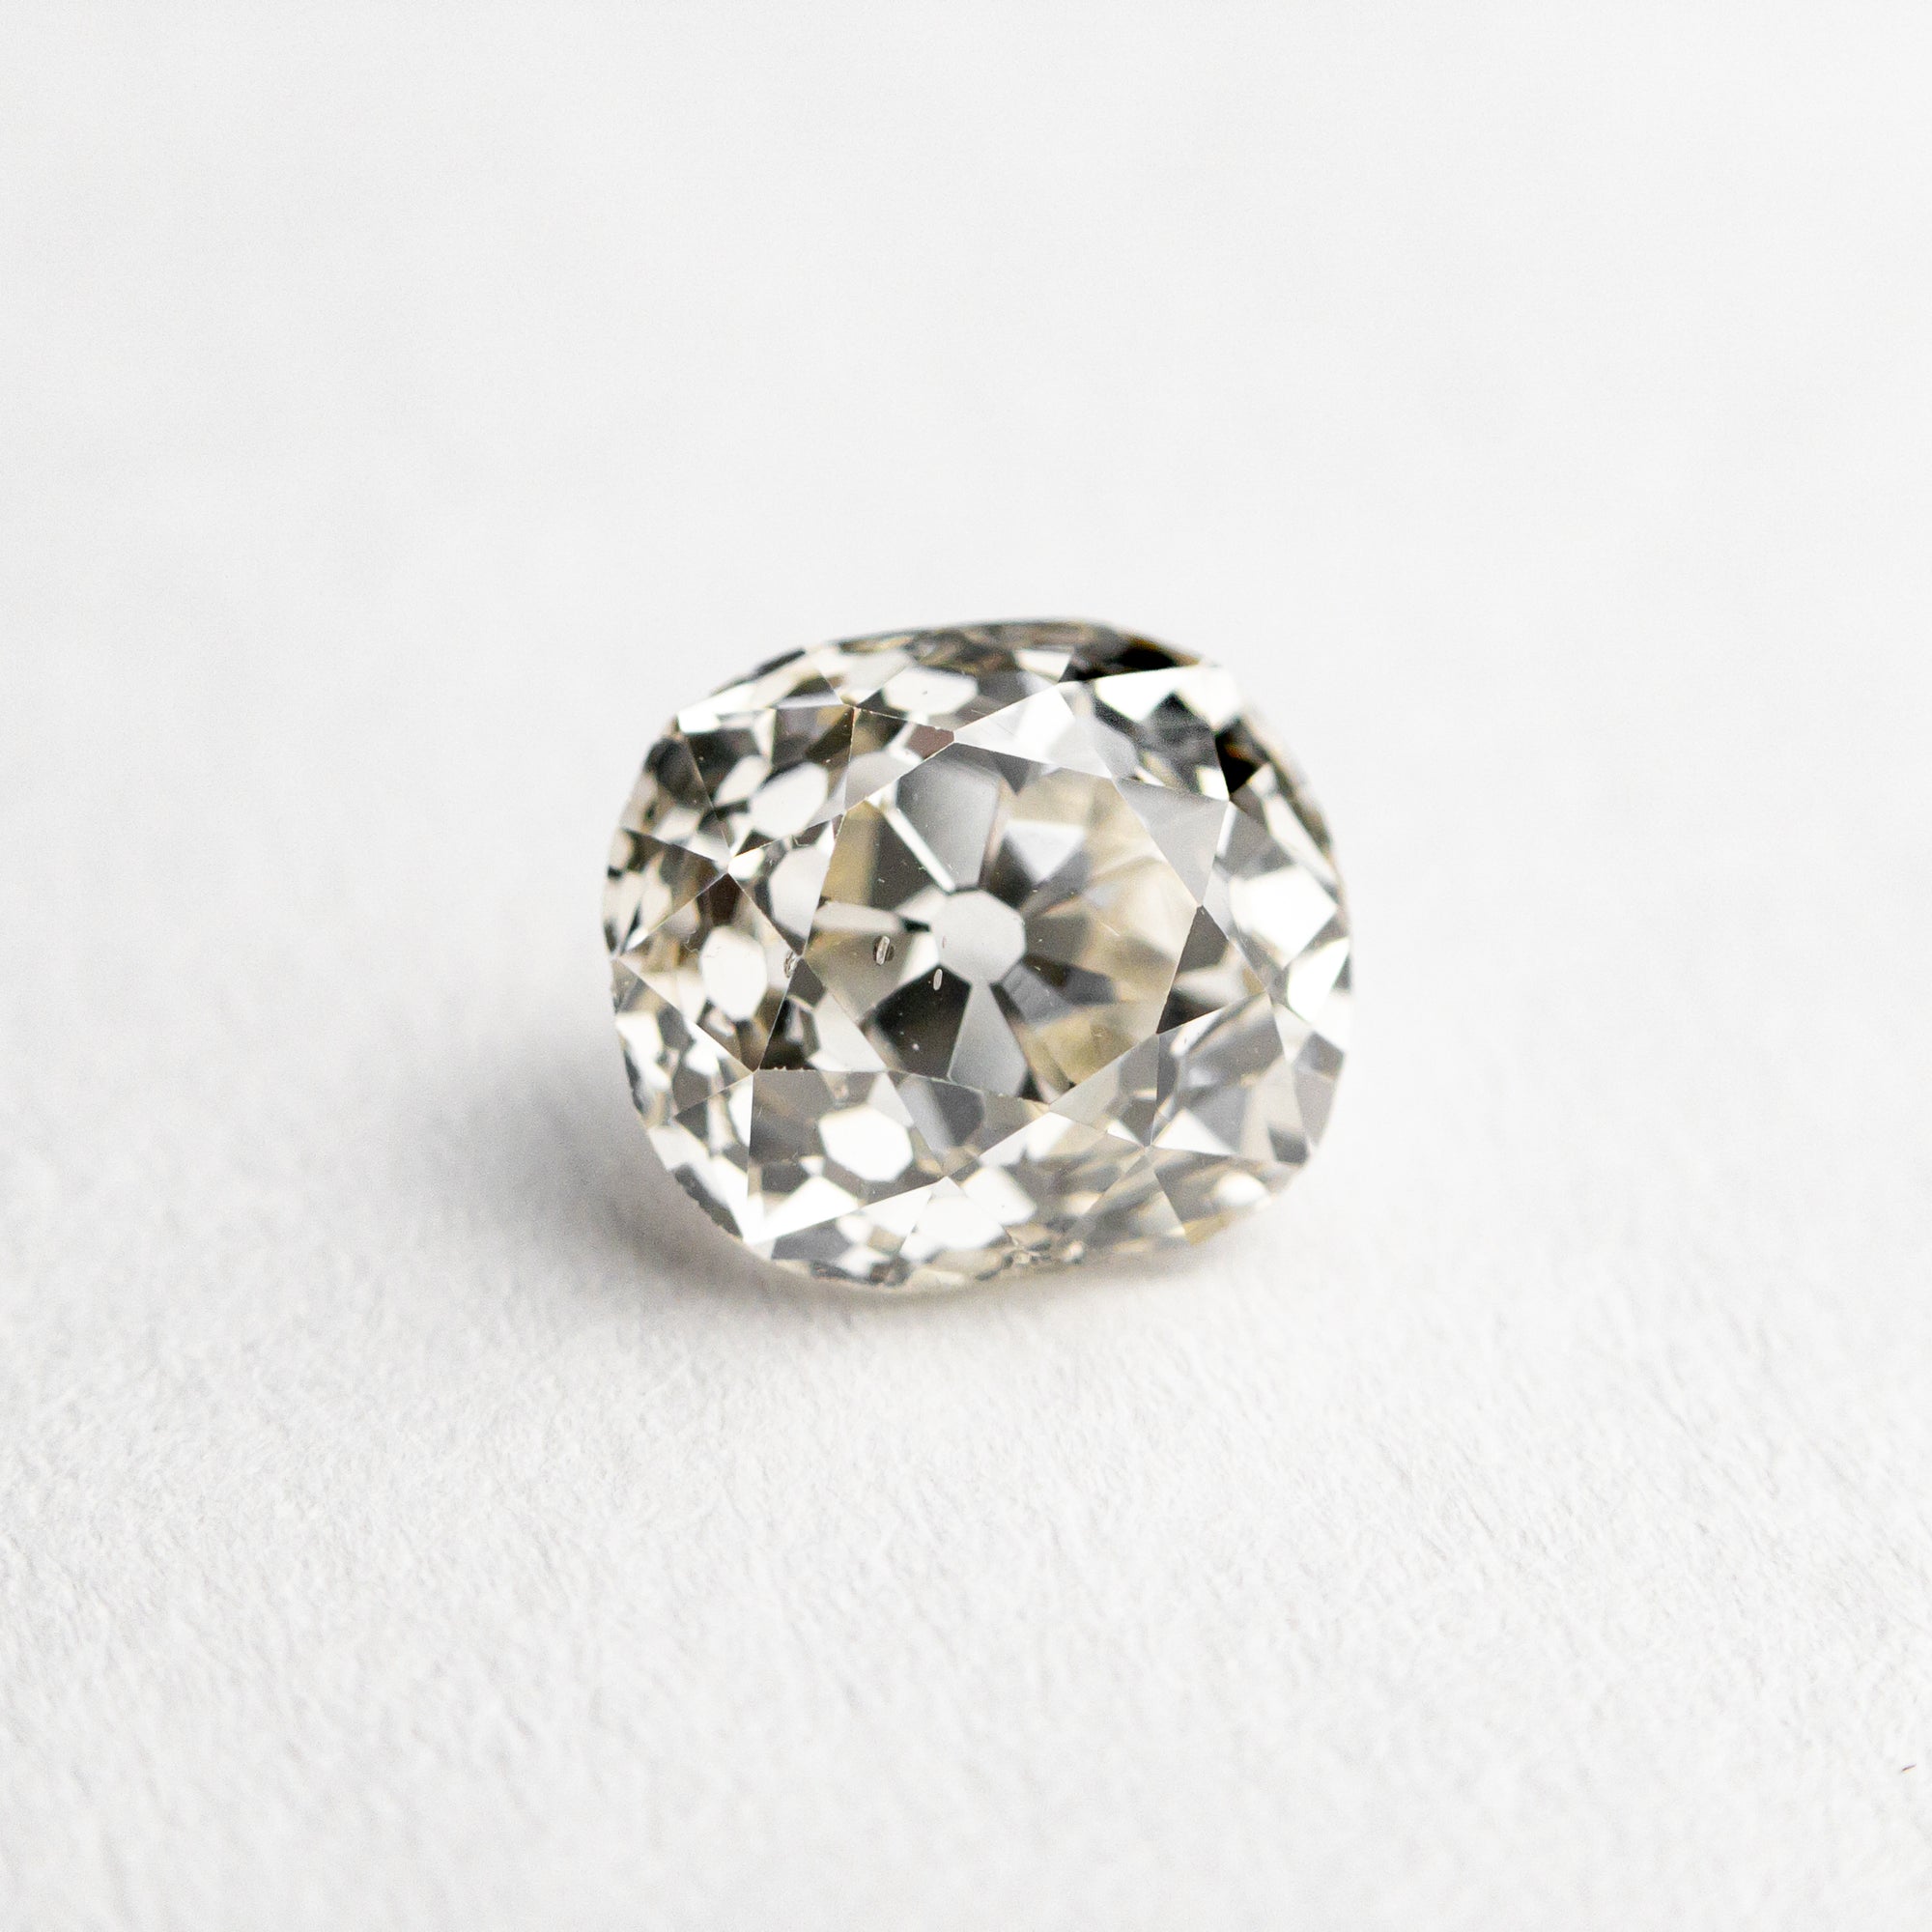 HOLD D9140 Sept 28/2023 1.18ct 6.41x5.67x4.39mm GIA SI1 M Antique Old Mine Cut 22469-01